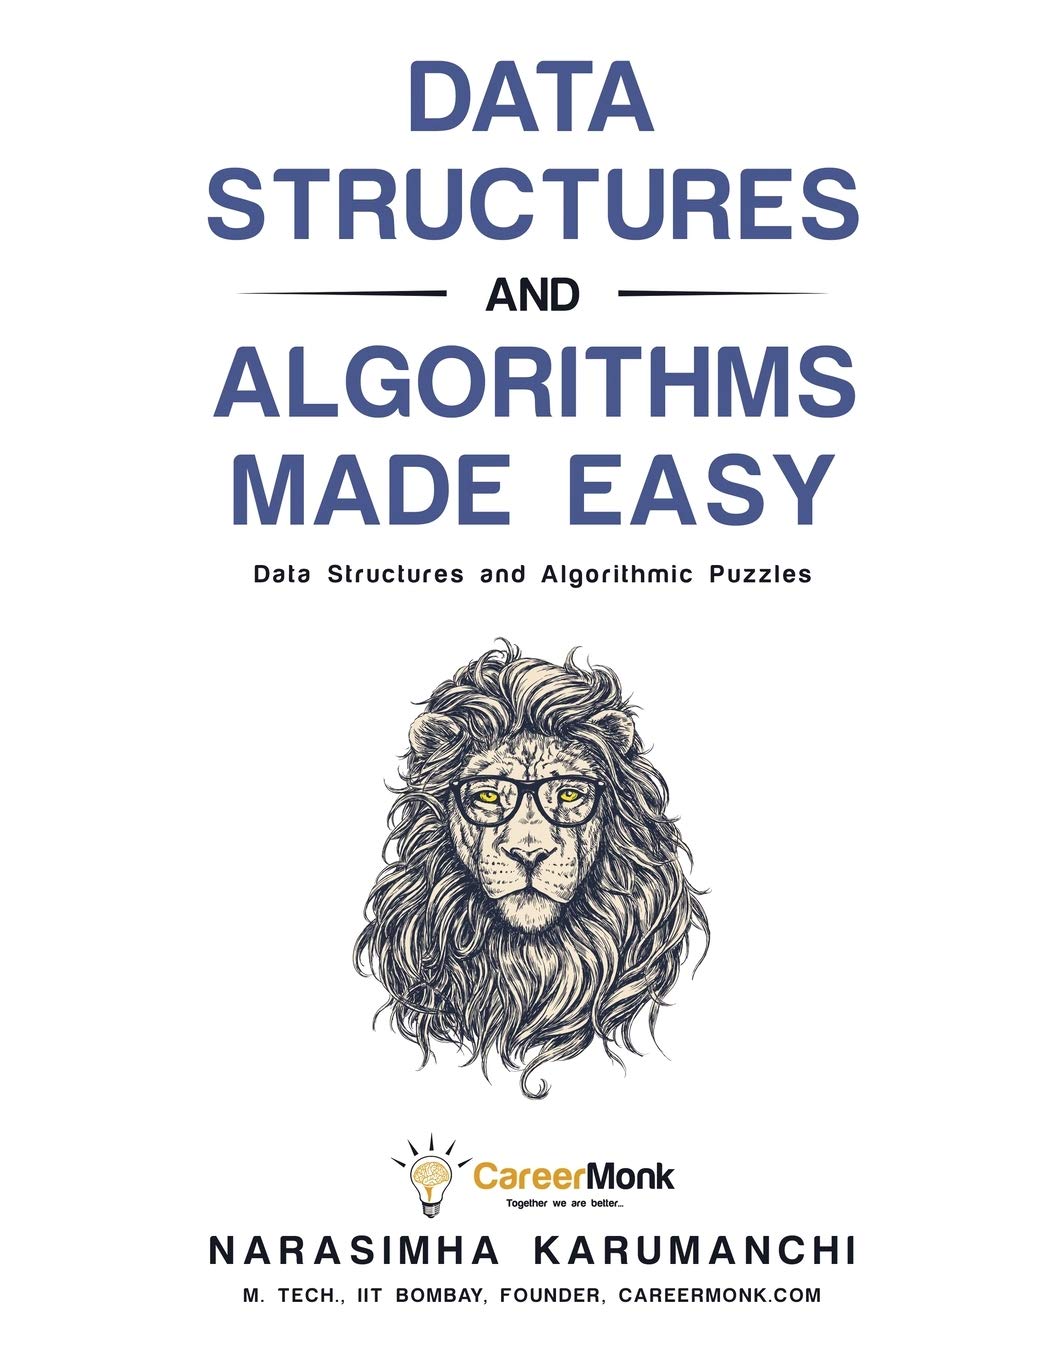 Data Structures and Algorithms Made Easy by Narasimha Karumanchi